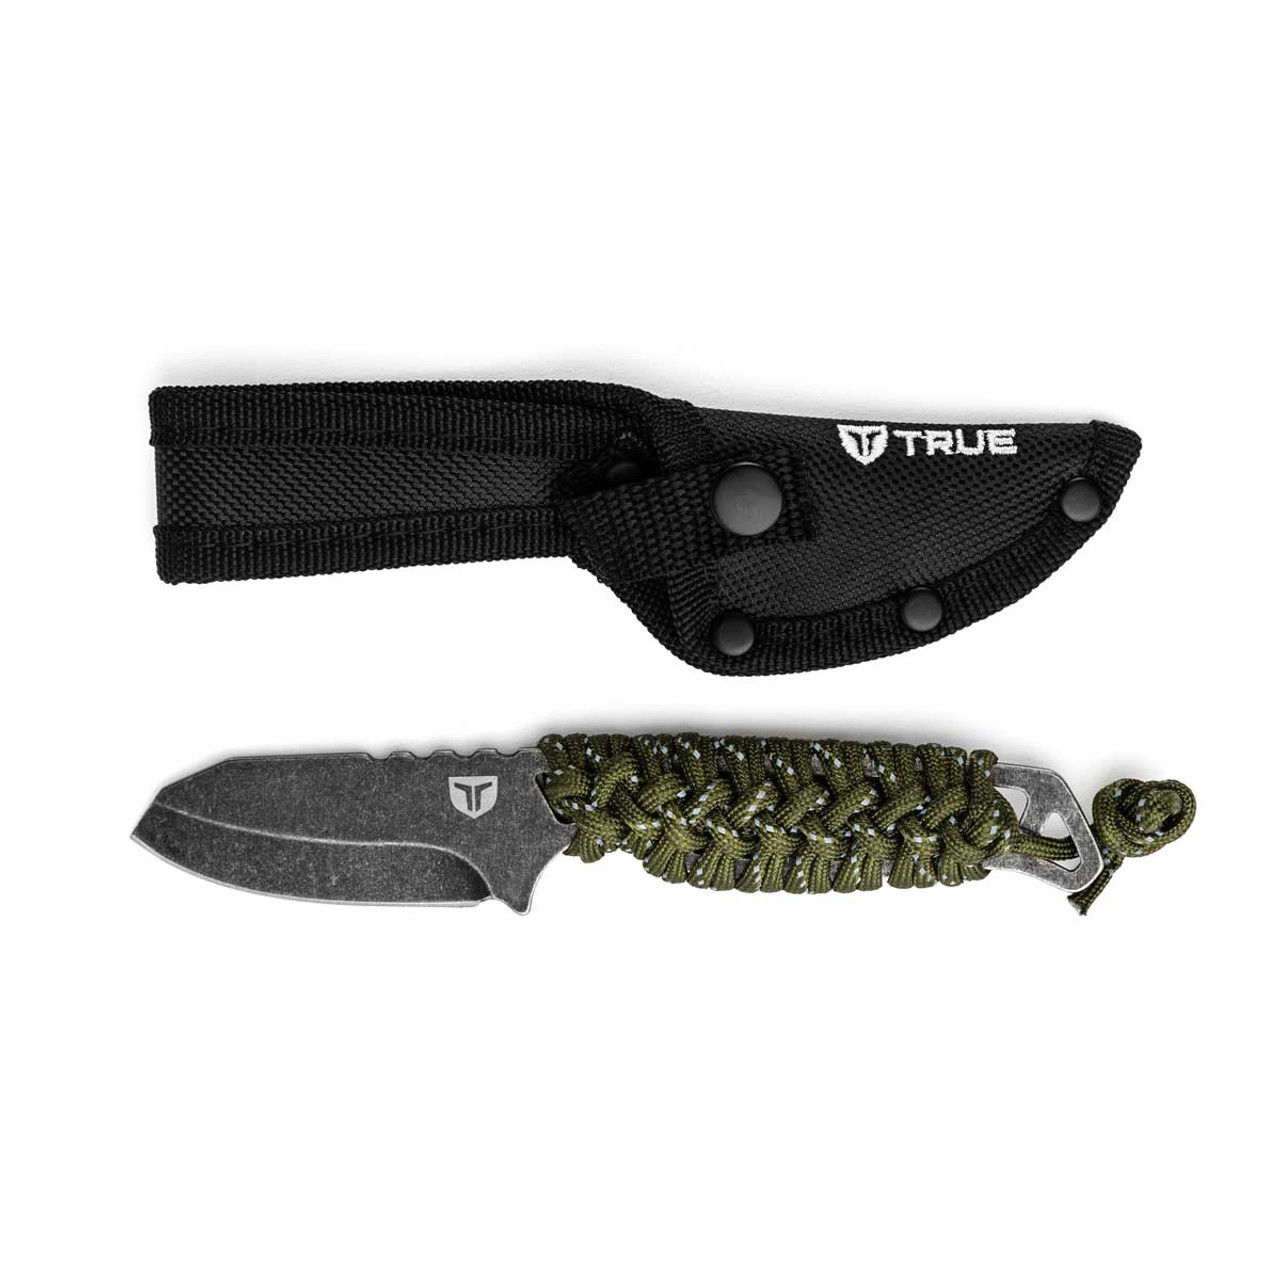 Nekkid Fixed Blade Knife – Beau Outfitters